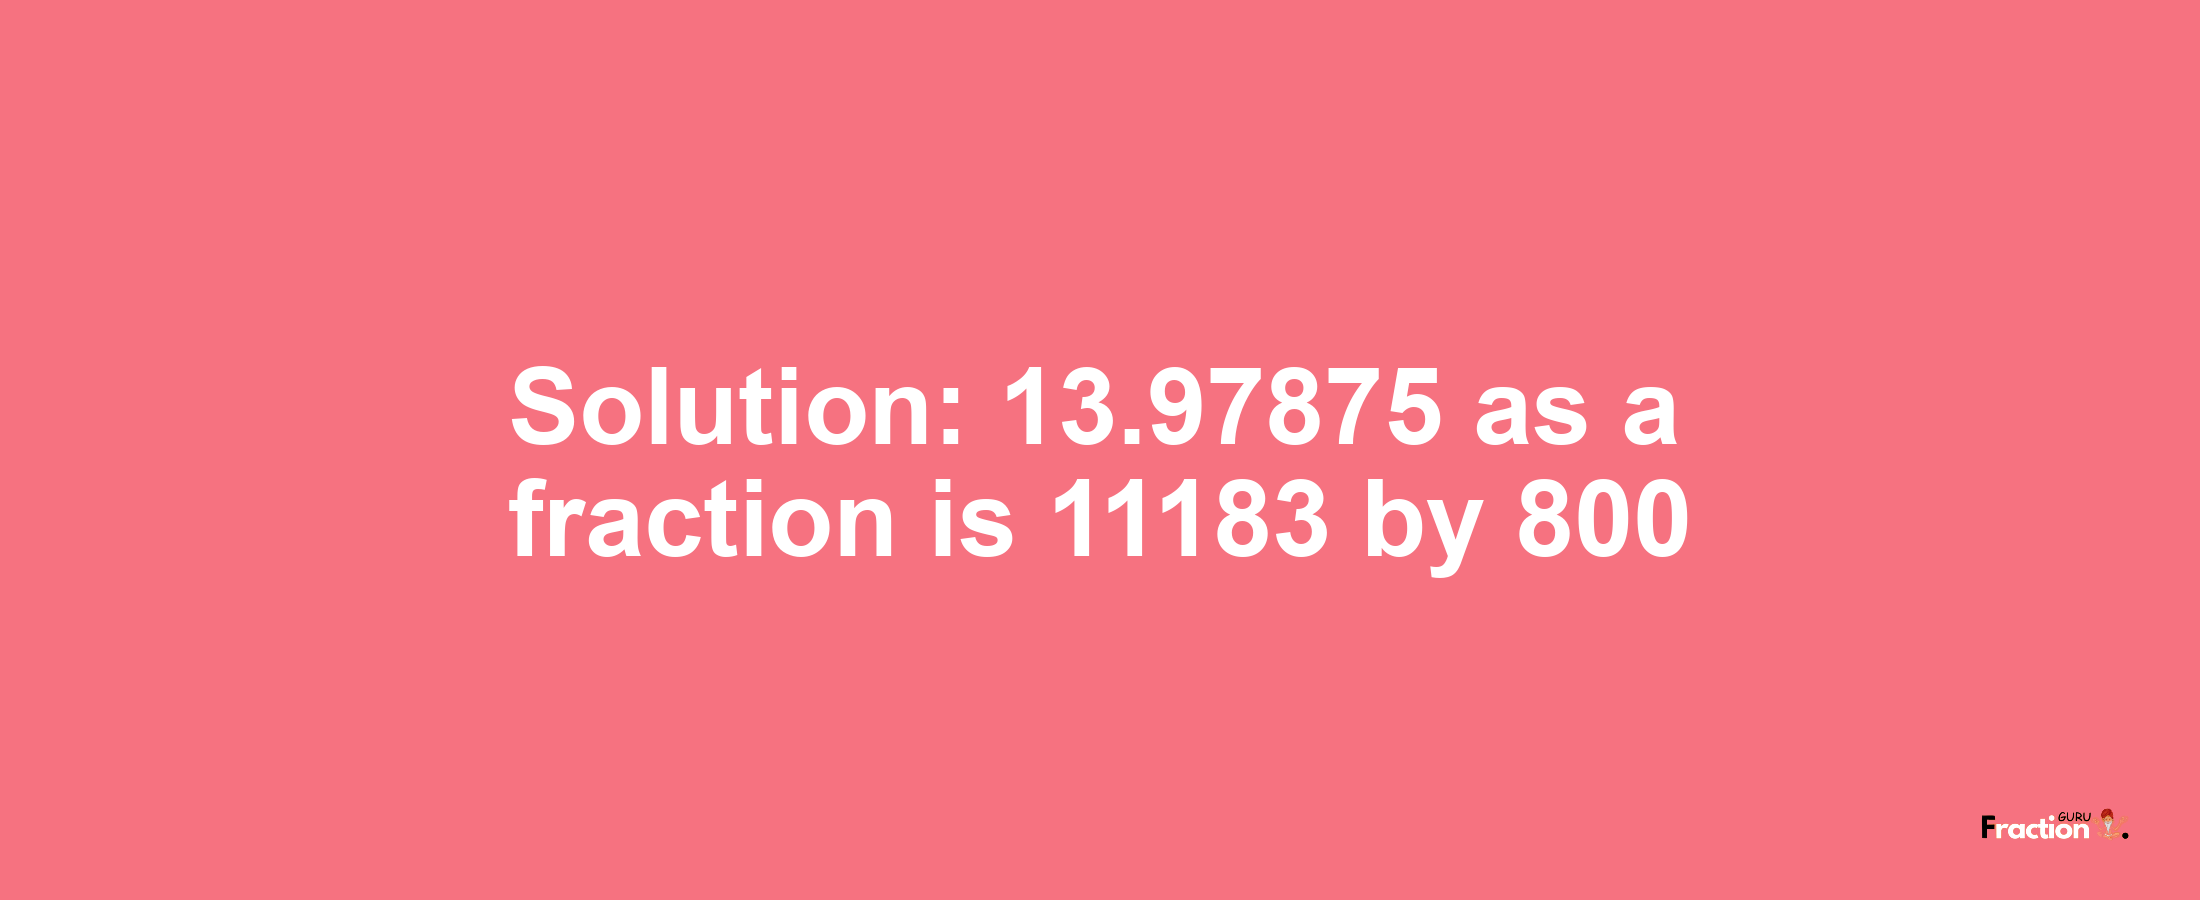 Solution:13.97875 as a fraction is 11183/800